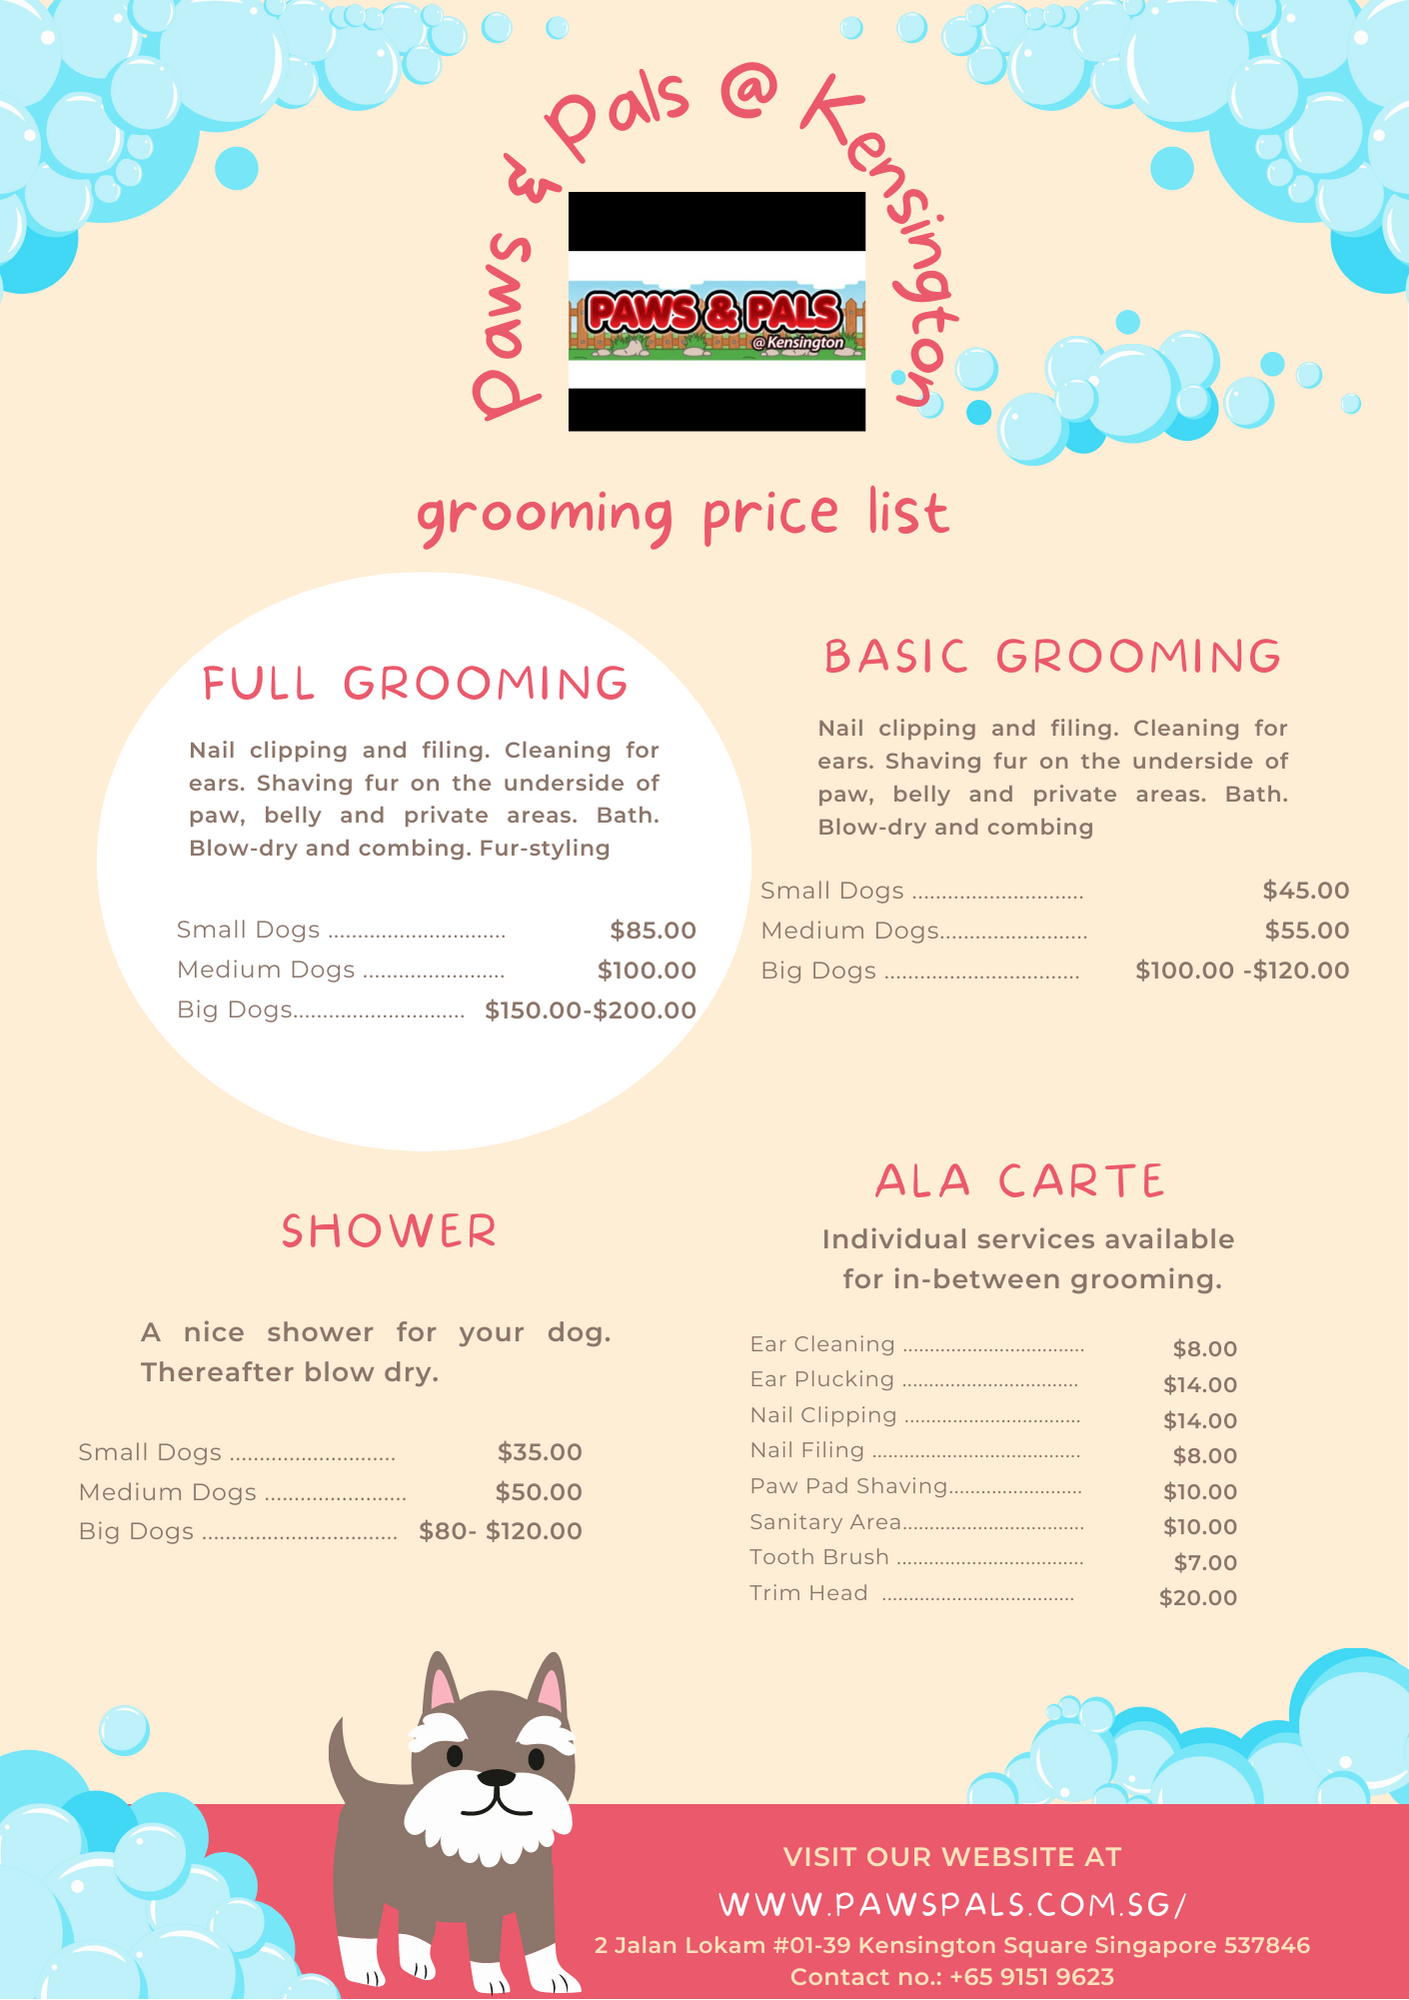 Pet-Grooming-Price-List-in-Singapore-Paws-n-Pals